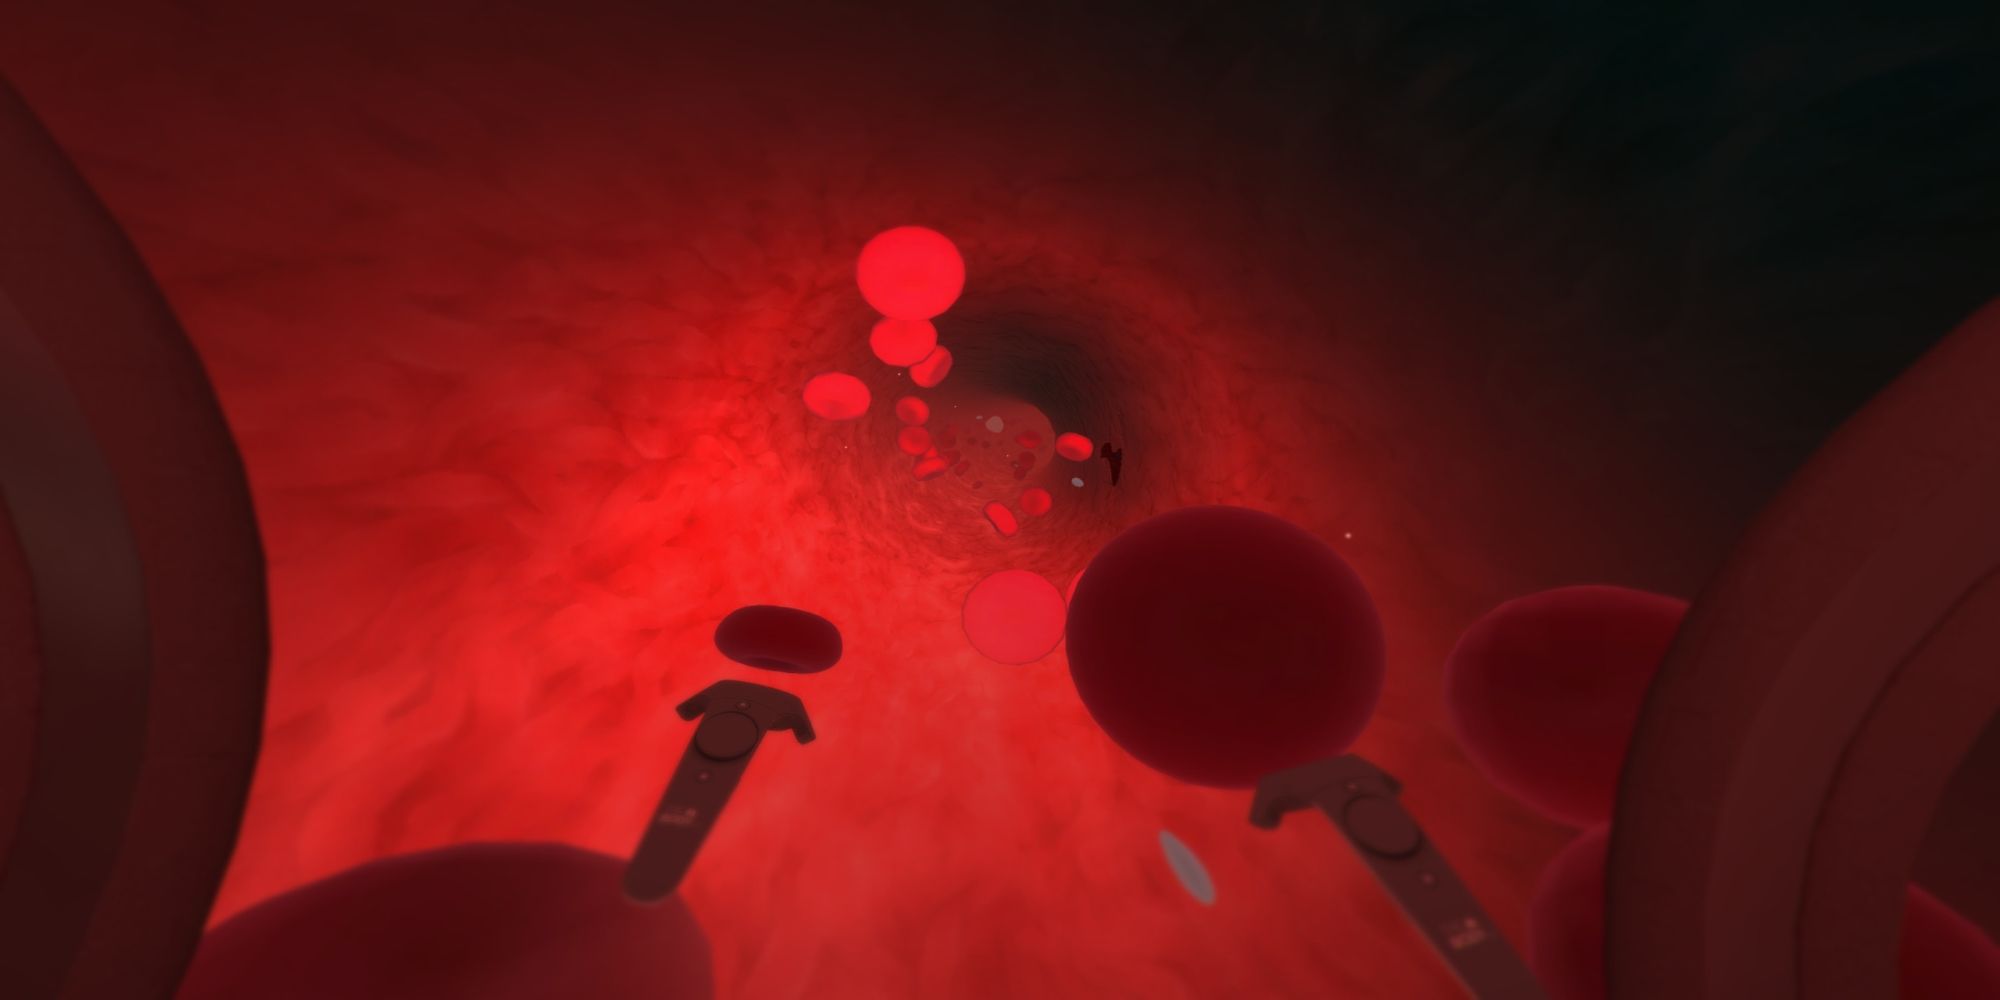 Inside Bloodstream From The Body VR Journey Inside A Cell